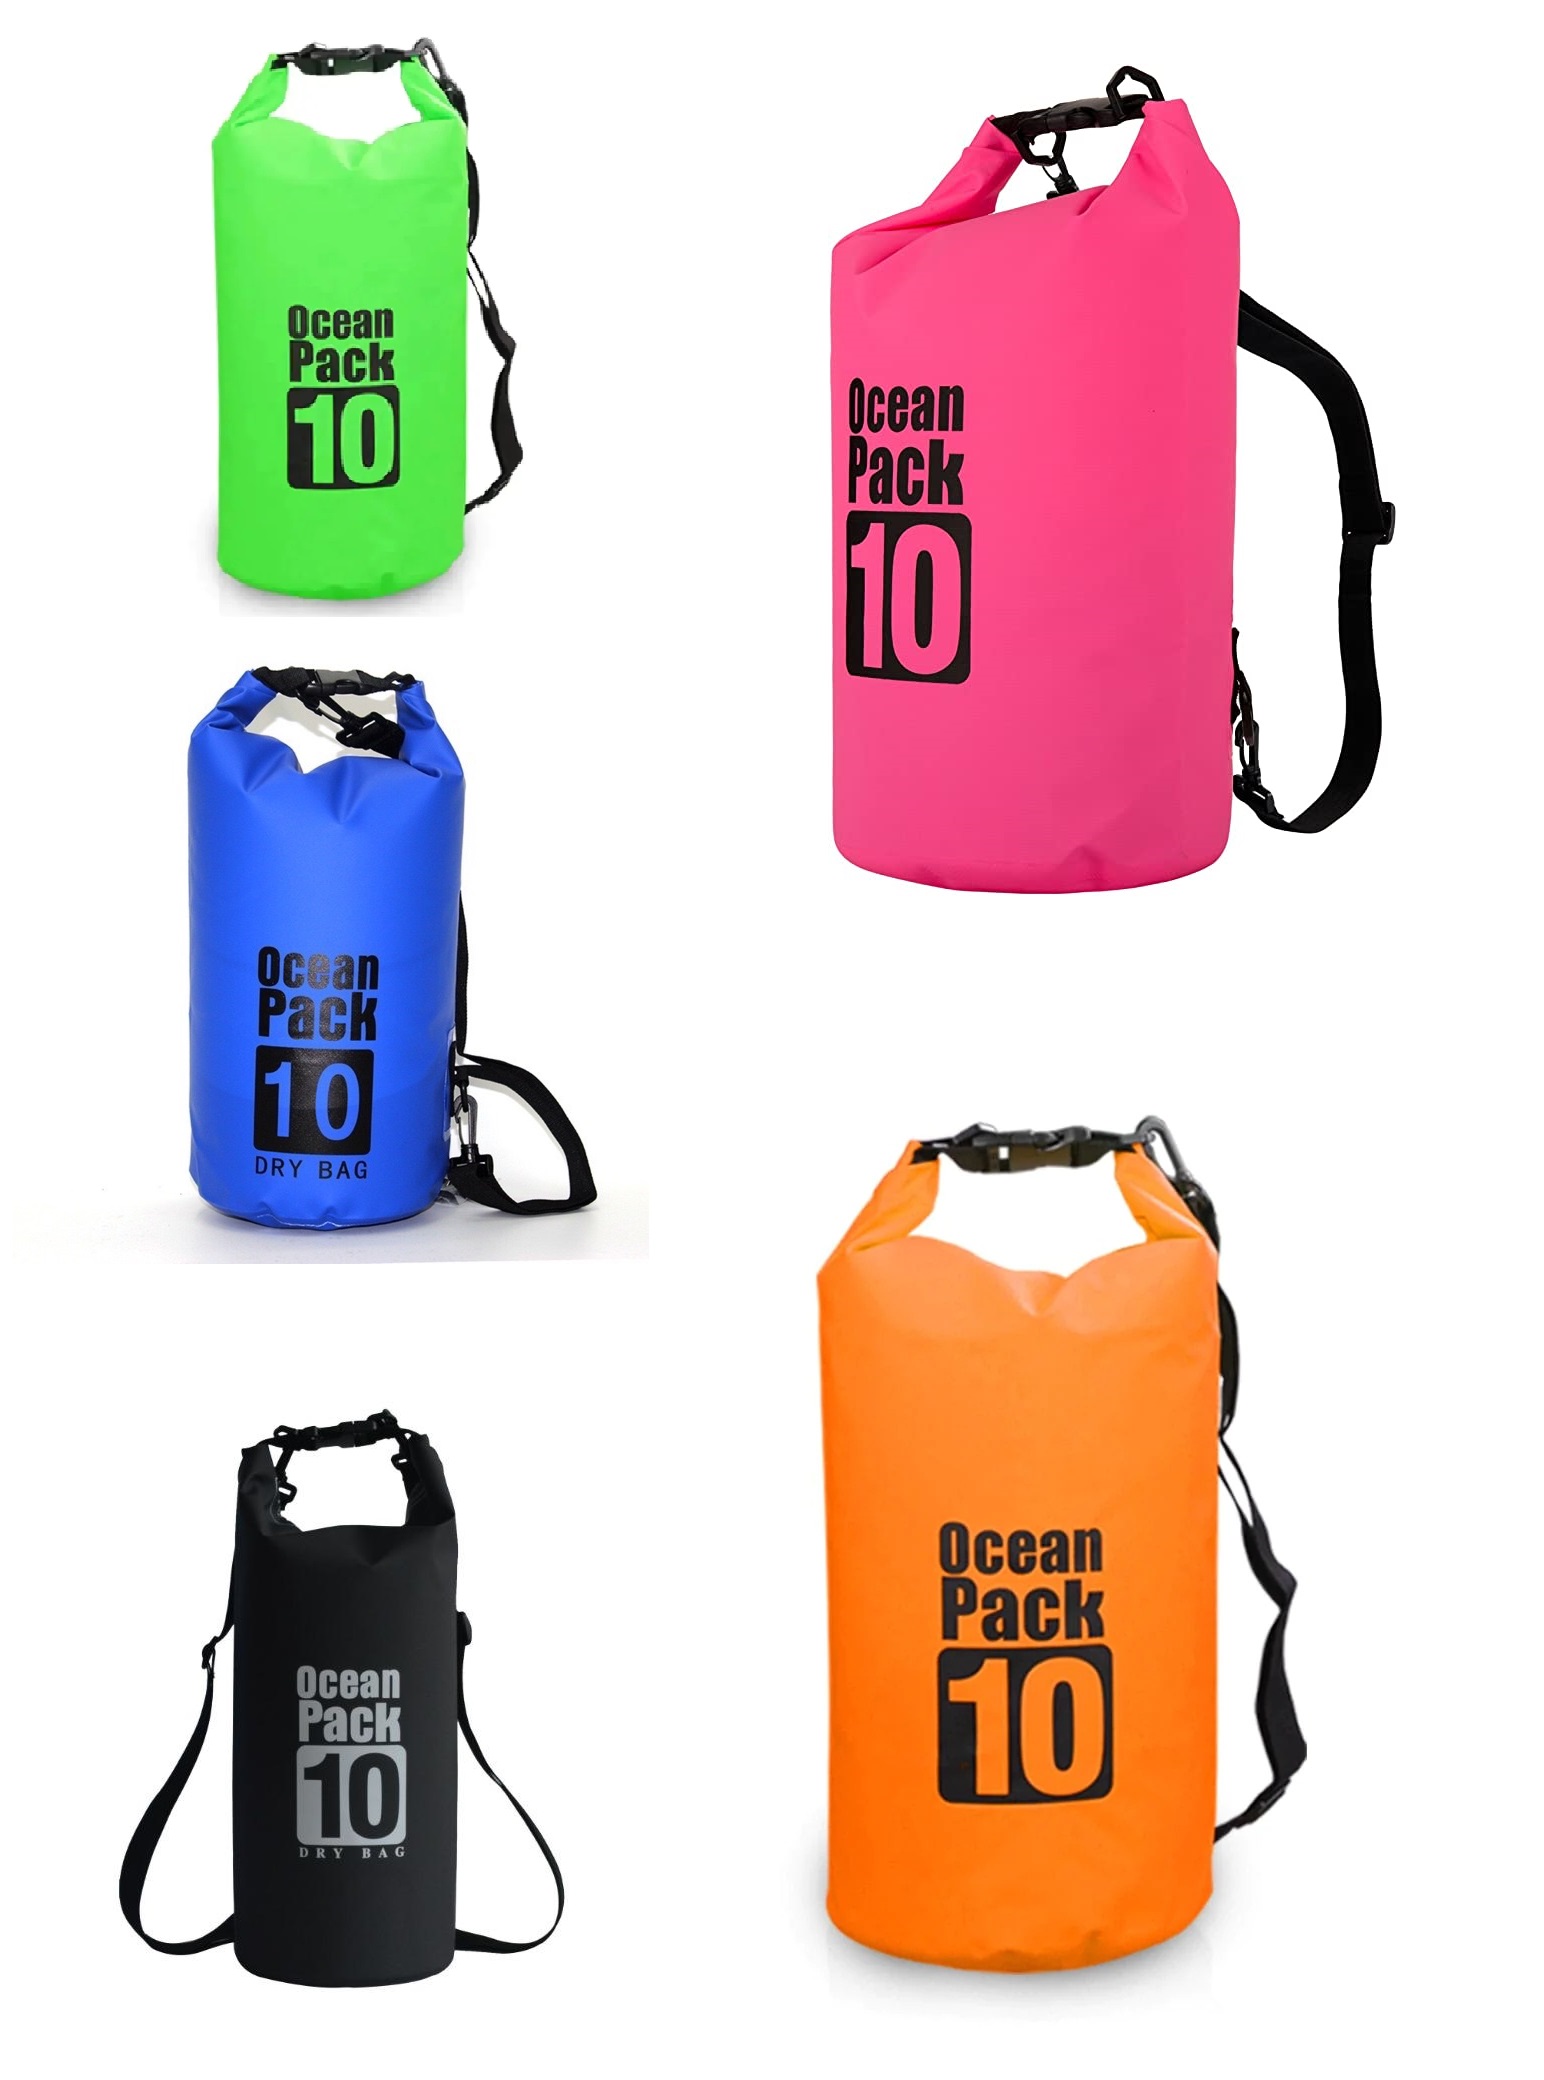 Gaisano Mall of Davao - Get this Ocean Pack Dry Bag 100% Waterproof best  for summer outings. Food, clothes, wallet and other personal belongings can  be stored inside. Available at your nearest #